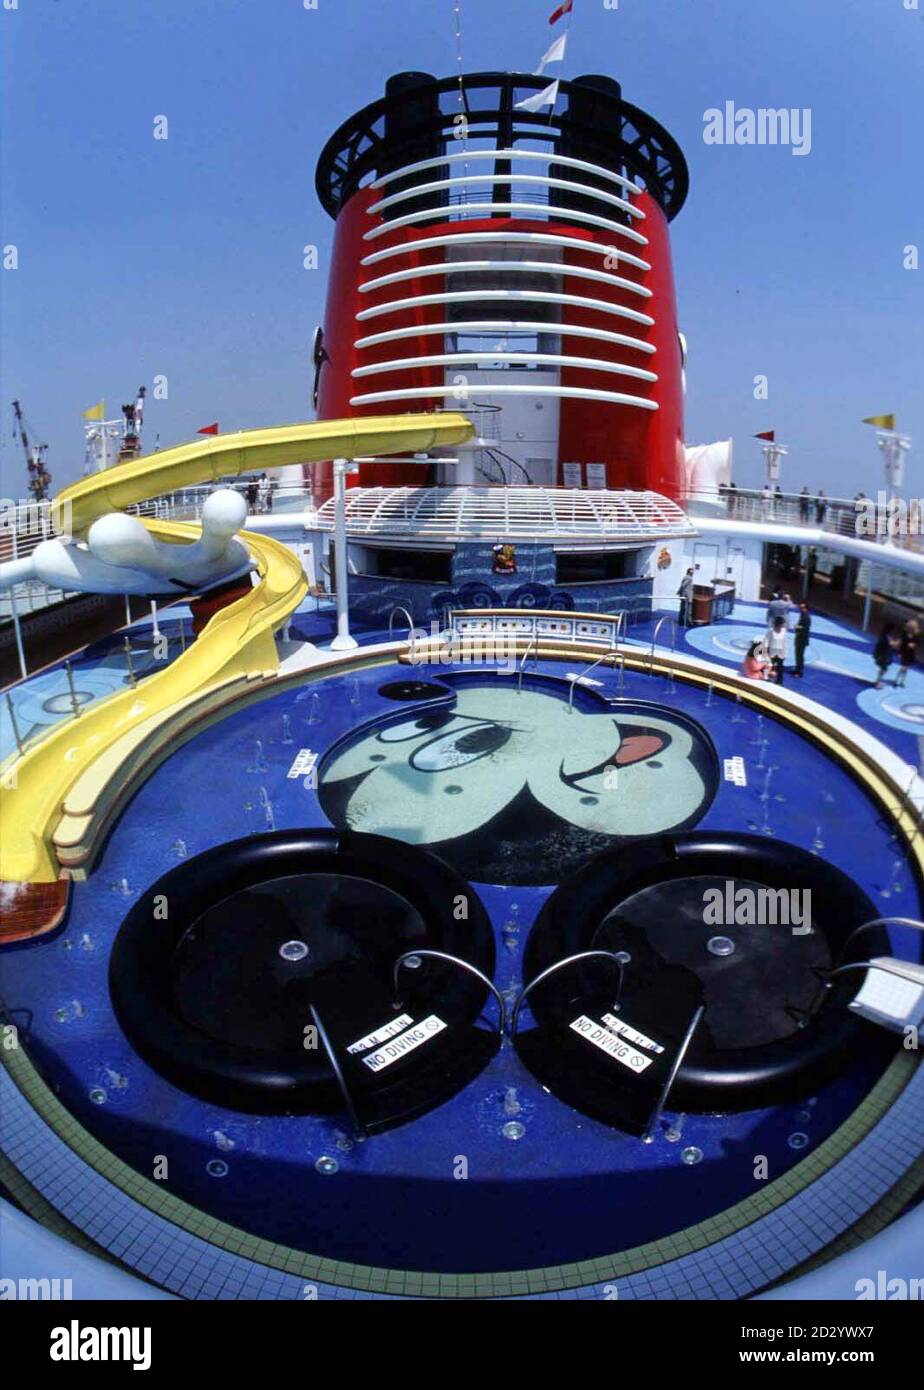 One of the main pool decks on the new Disney cruise ship, the Disney Magic, which can accommodate 2,400 guests on its eleven passenger decks. The ship is a new direction for the company, better known for its entertainment and theme parks. The seven-day holiday packages combine a three or four day trip to Walt Disney World in Florida with a three or four day cruise in the Bahamas. The 83,000-ton vessel, one of the biggest in the world, will sail from Port Canaveral in Florida, call at the historic Port of Nassau and spend a day at Disney's own private pleasure island in the Bahamas, Castaway Ca Stock Photo